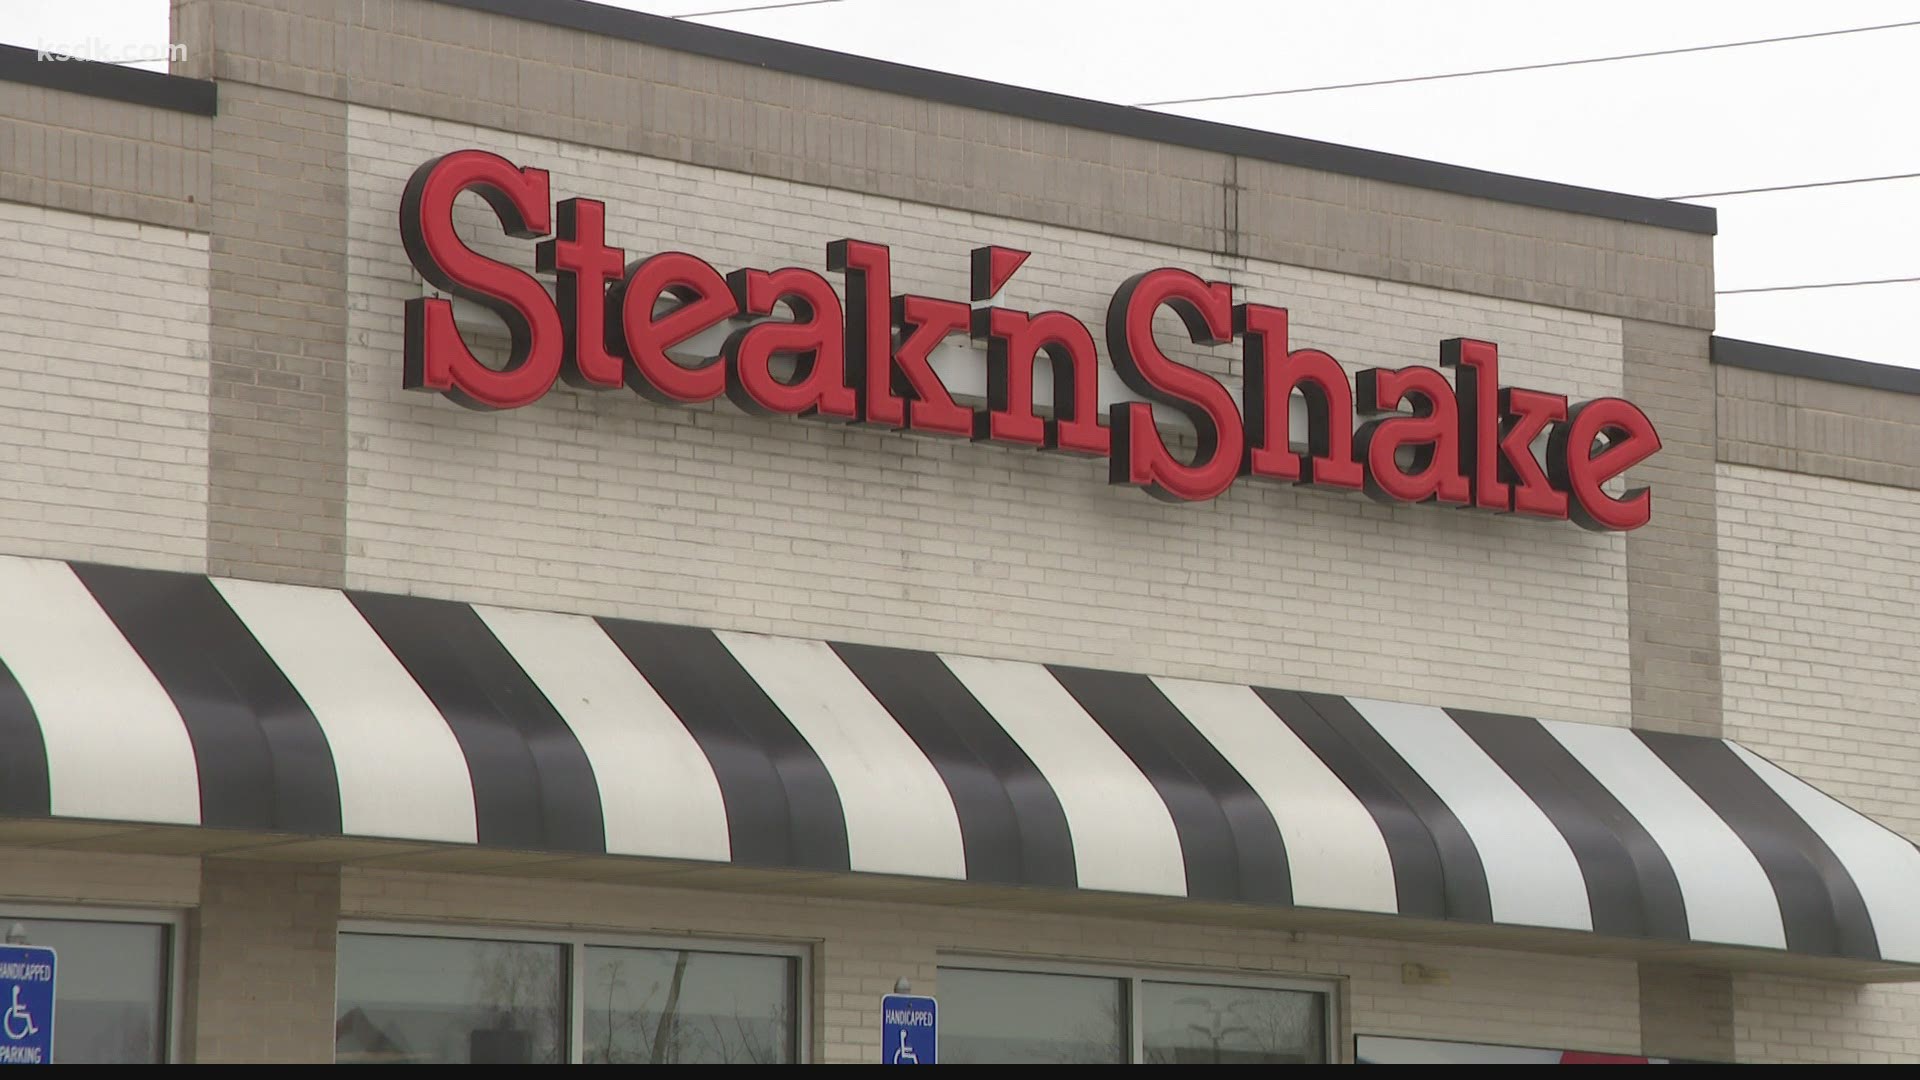 Steak n’ Shake has officially reopened in Arnold after closing its dining room due to COVID-19 more than a year ago.